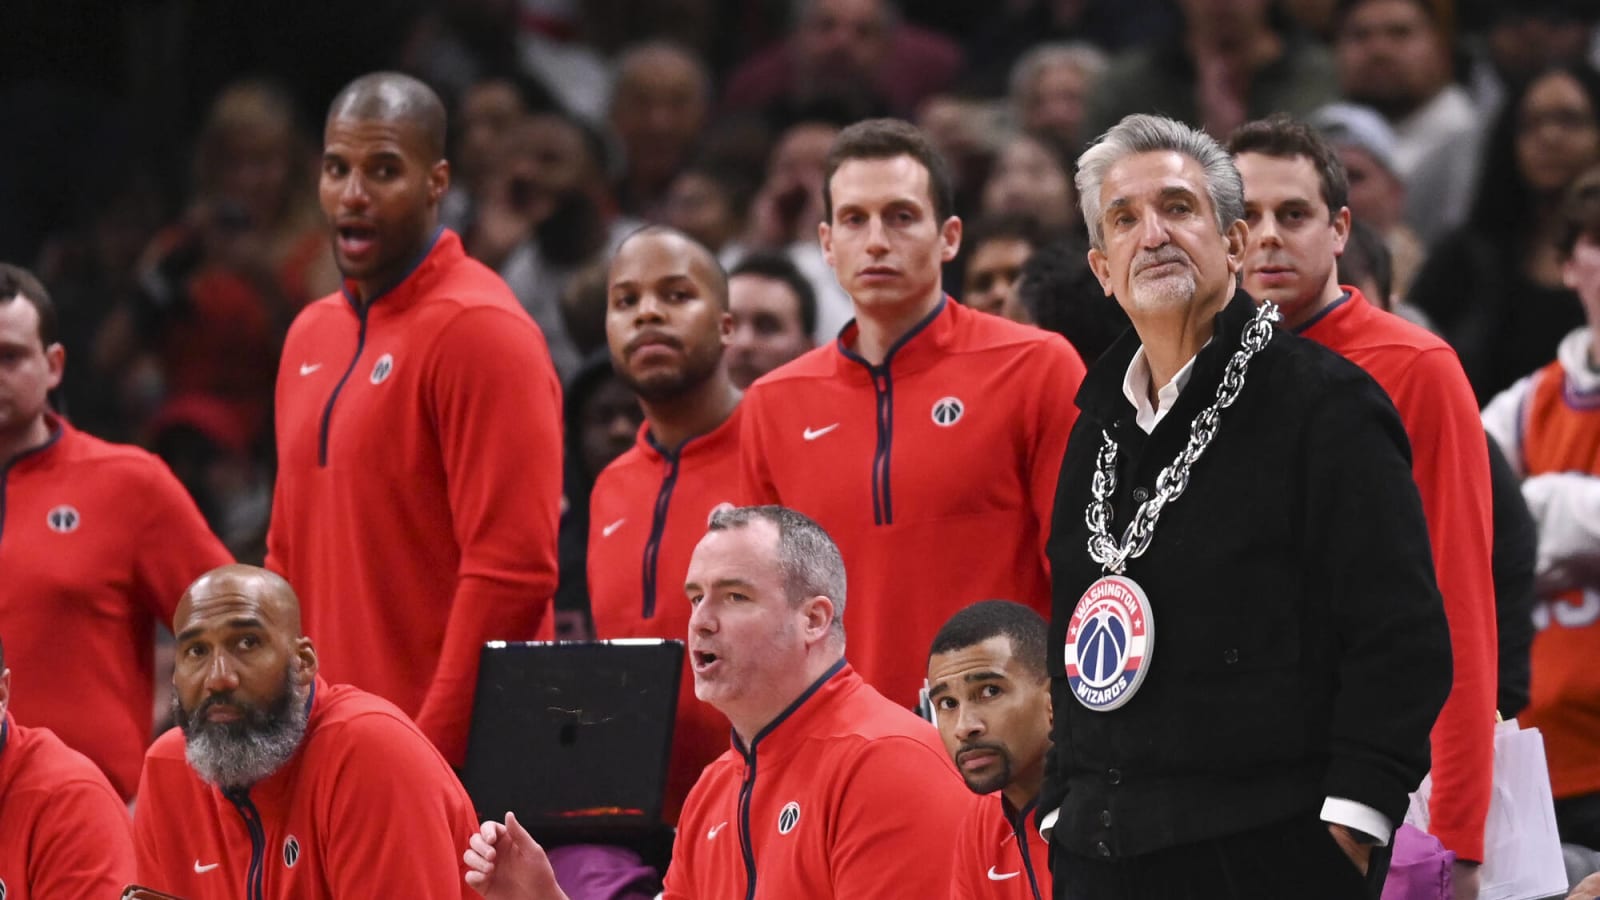 Wizards announce move to Alexandria, Va.; owner Ted Leonsis avoids questions